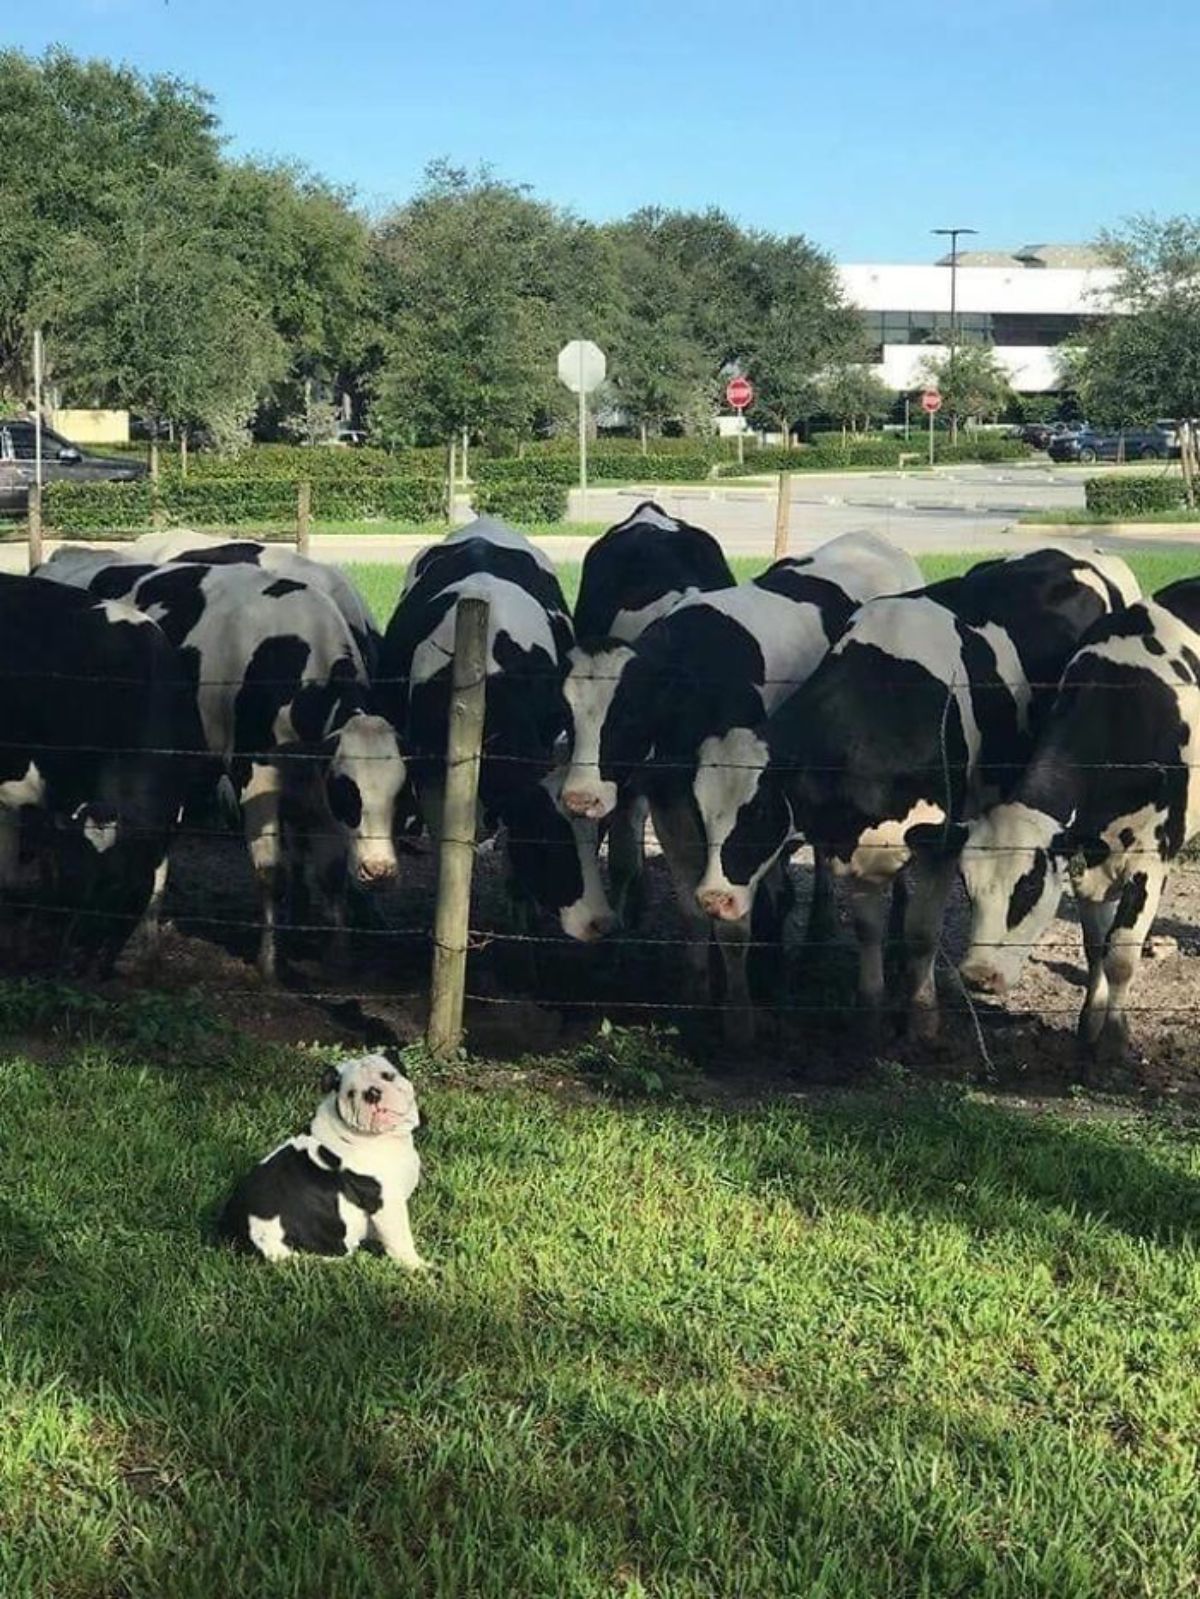 black and white bulldog sitting on grass with 8 black and white cows on the other side of the fence staring at the dog